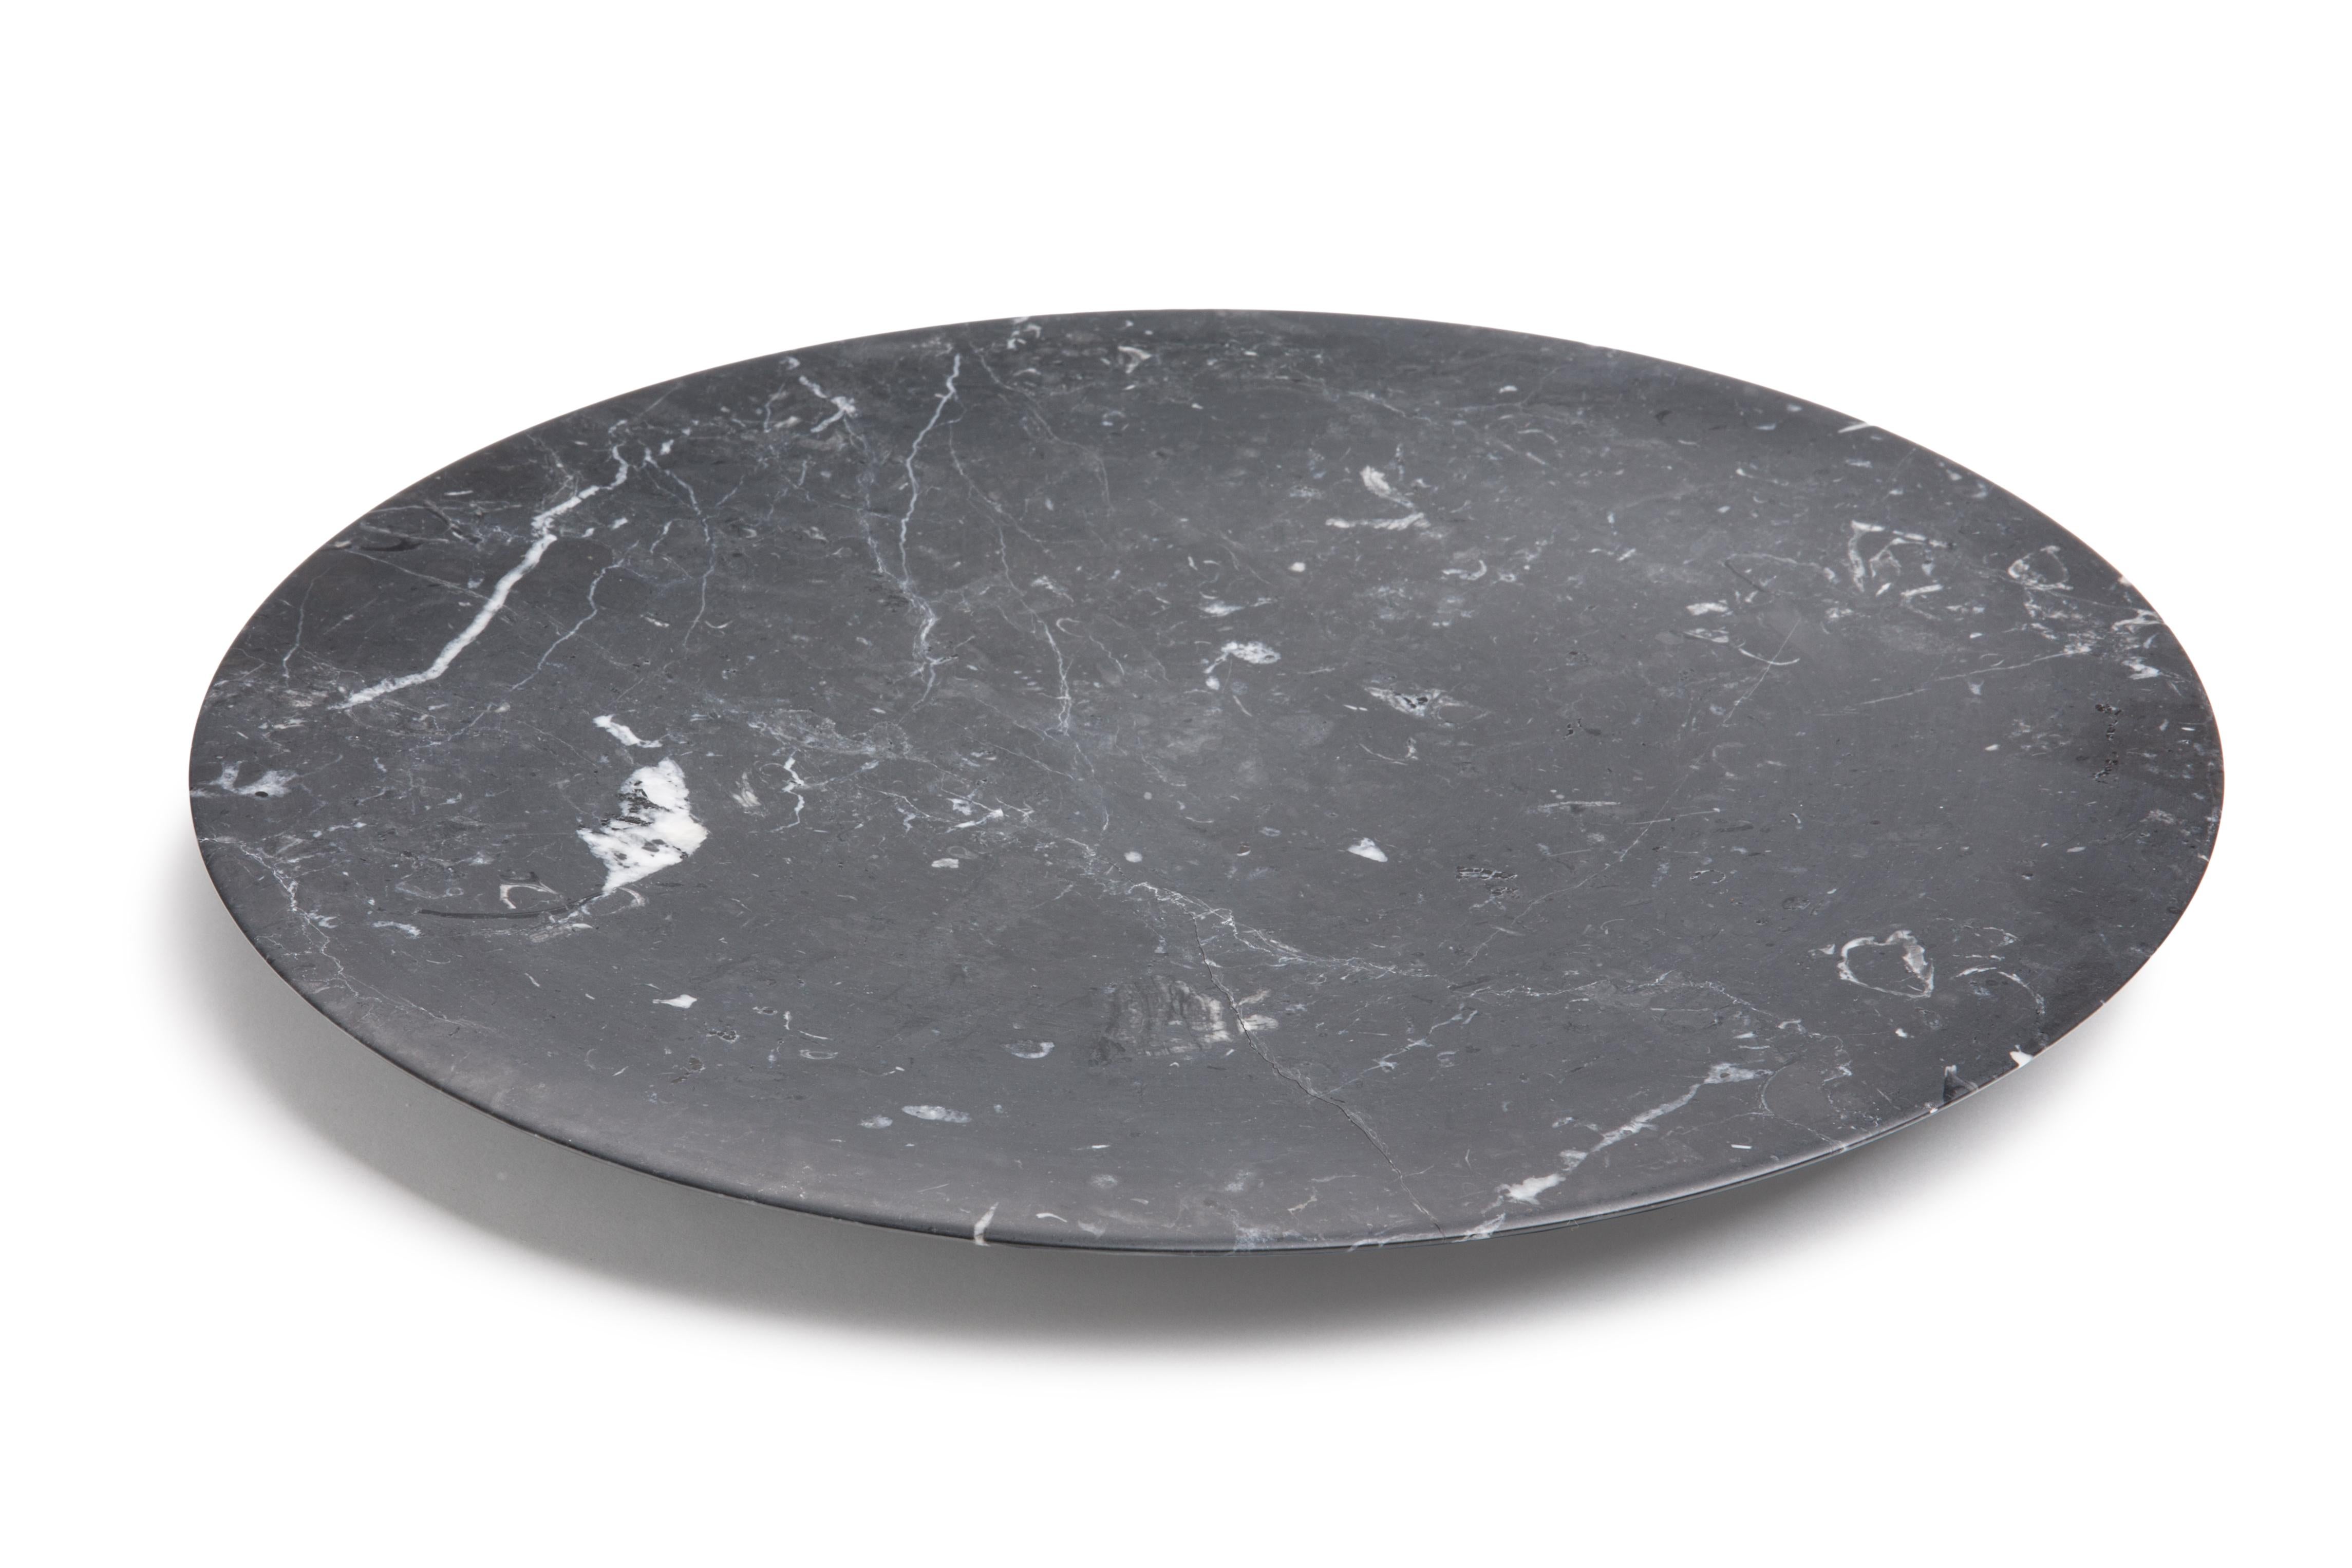 This stunning tray, made from Black Carnico marble, evokes the Renaissance concept of man being at the center of space and nature with its circular shape. The circle is rich in symbolism in European history and art. The fusion of these two elements